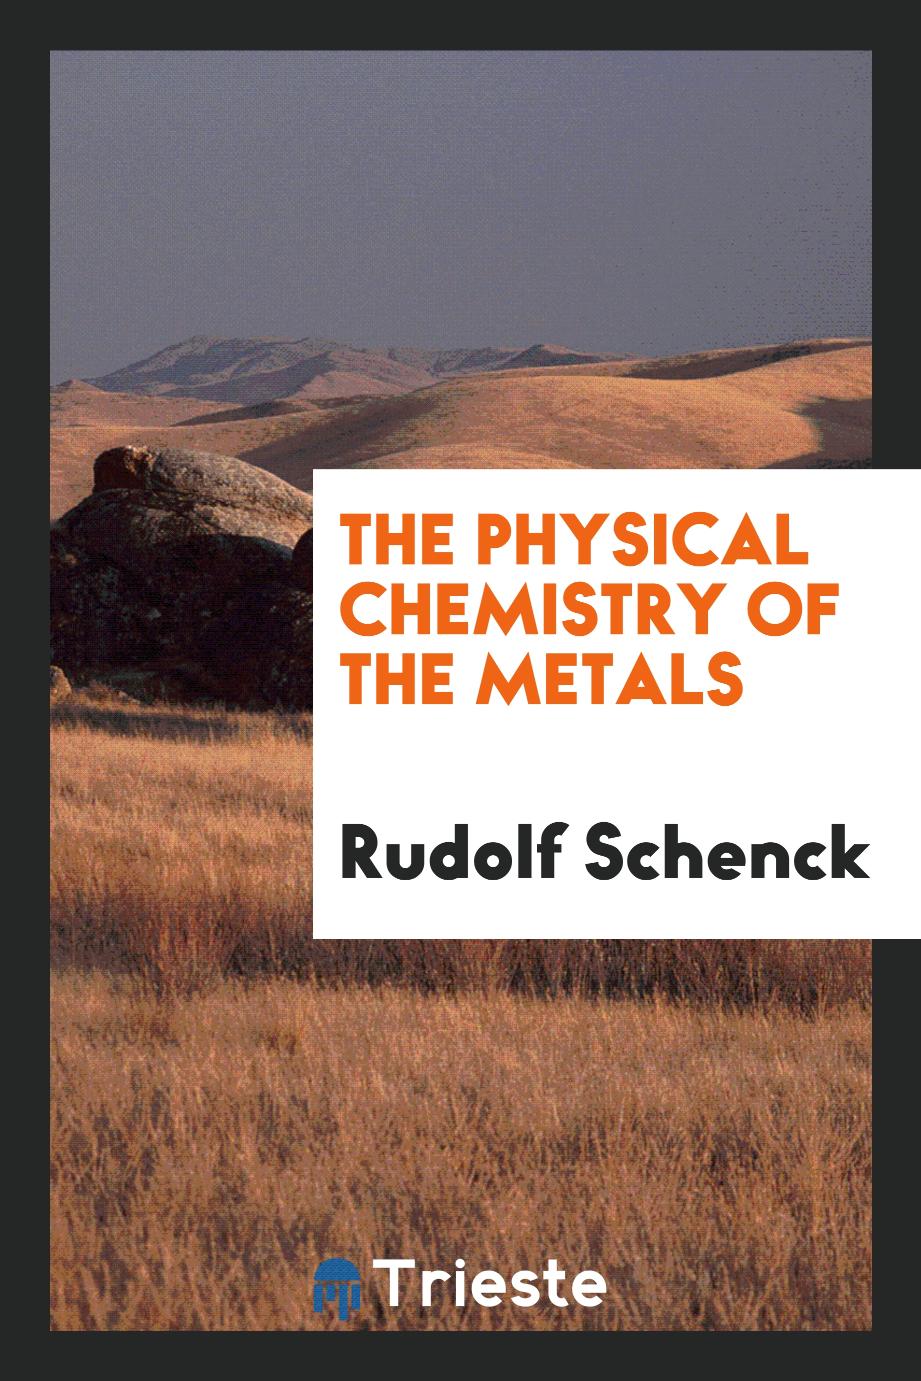 The physical chemistry of the metals